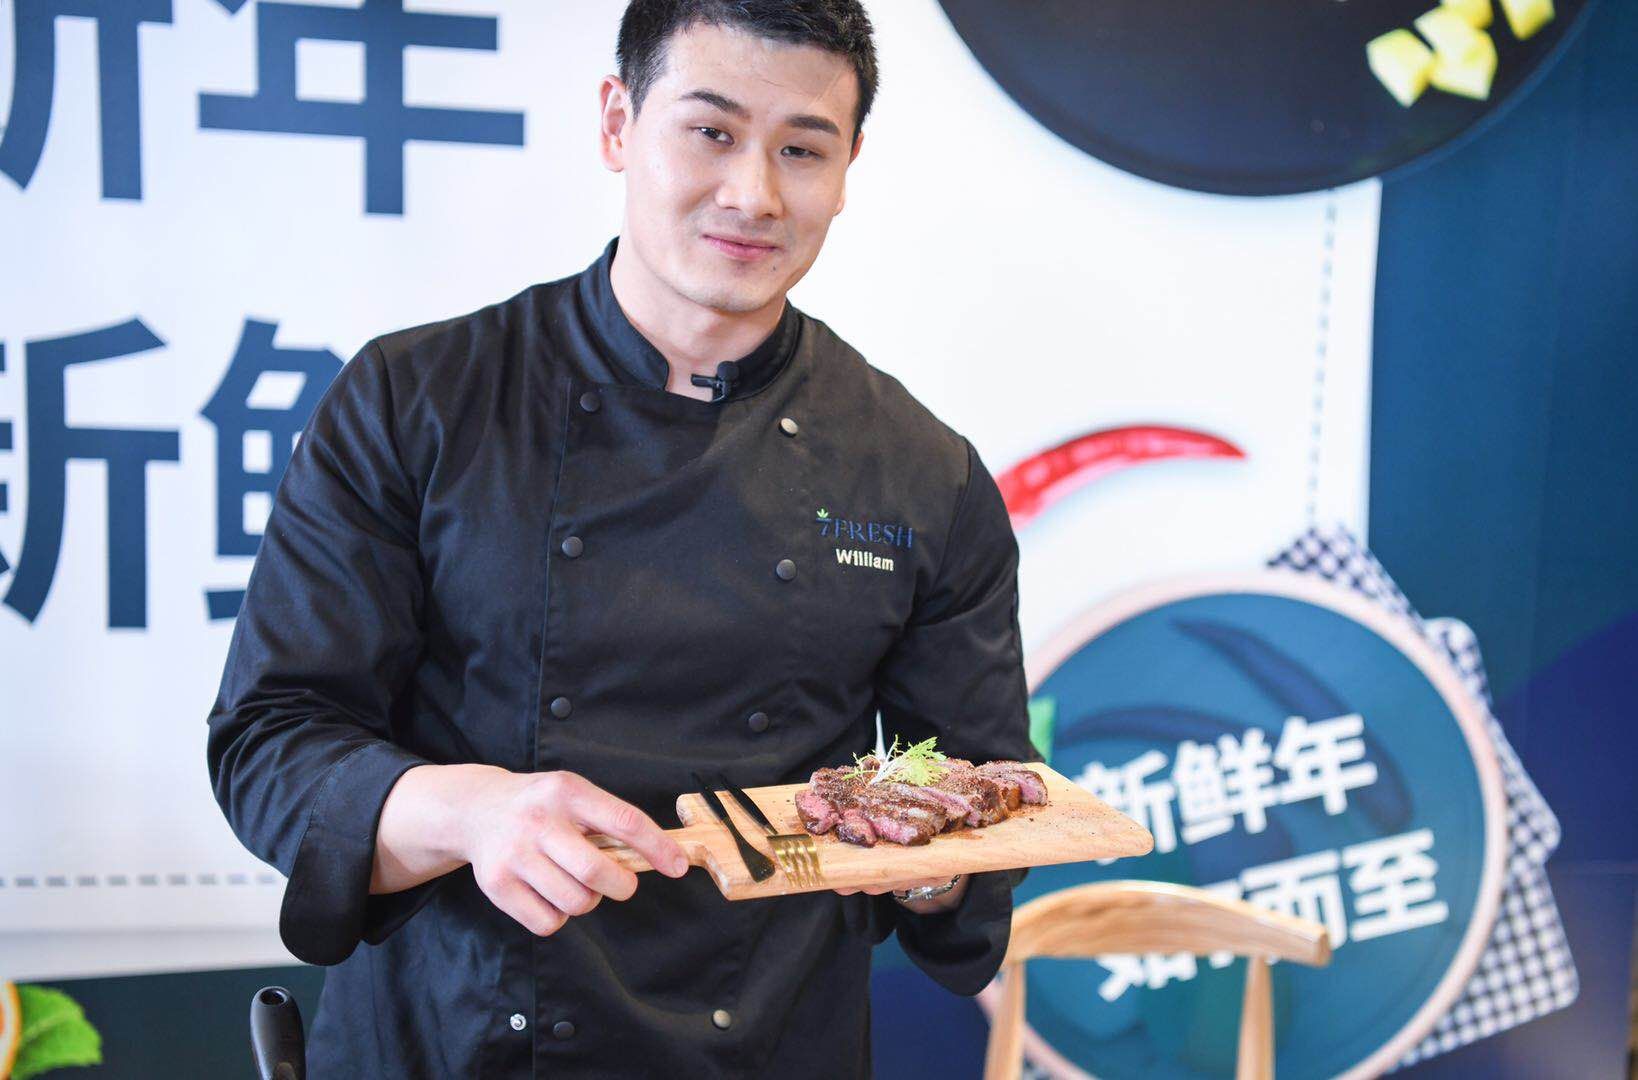 Starting from selecting fresh lobster to finally presenting the dish at the dinning table, Wu has found a new way to bring cuisine to consumers.